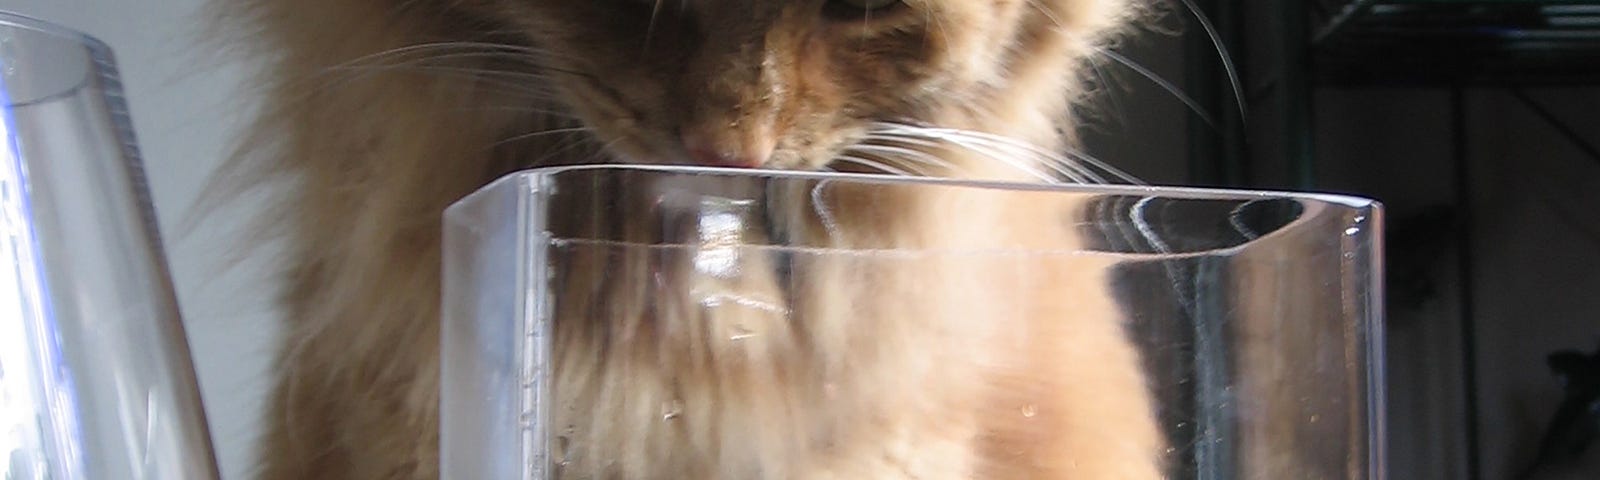 A orange long-haired cat longing looking at the open glass fishbowl filled with water and a floating goldfish. As if the metaphor for ‘beta-testing’ the scenario.